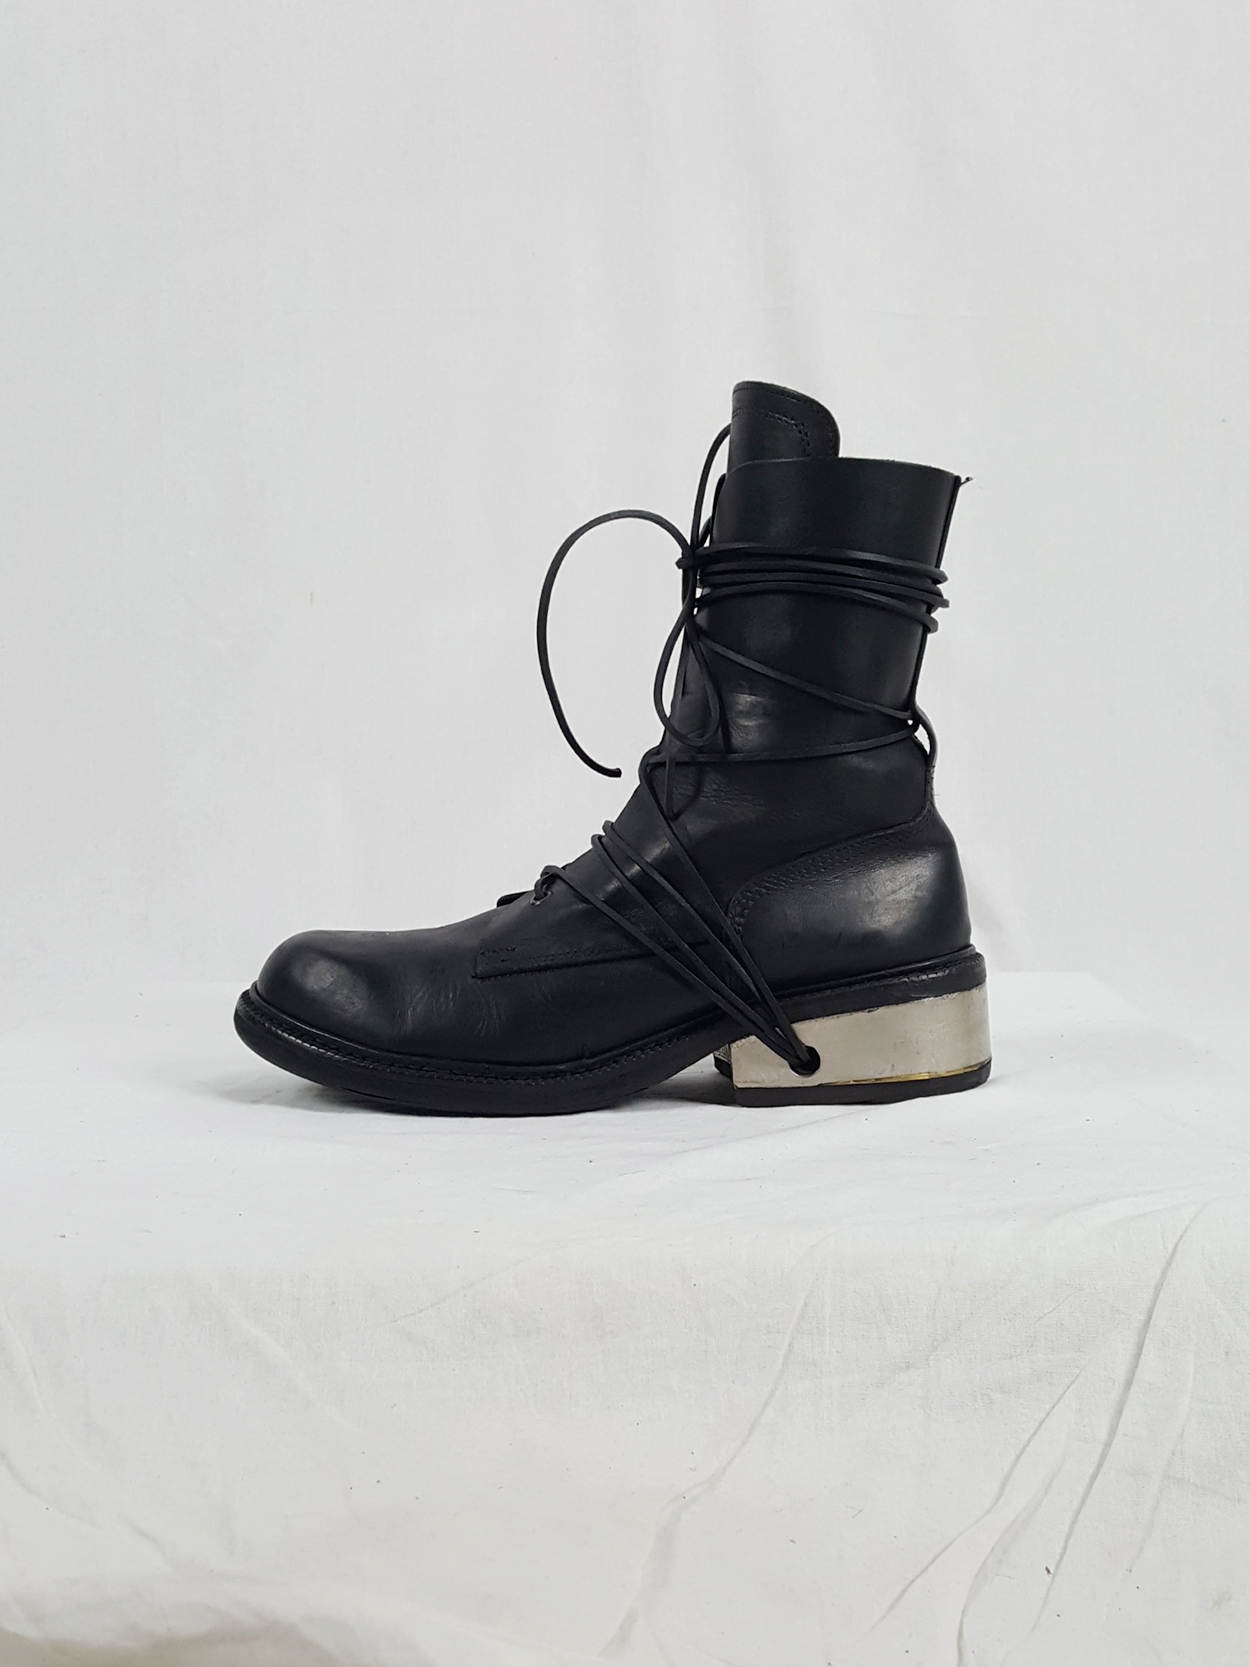 Dirk Bikkembergs black tall boots with laces through the metal 